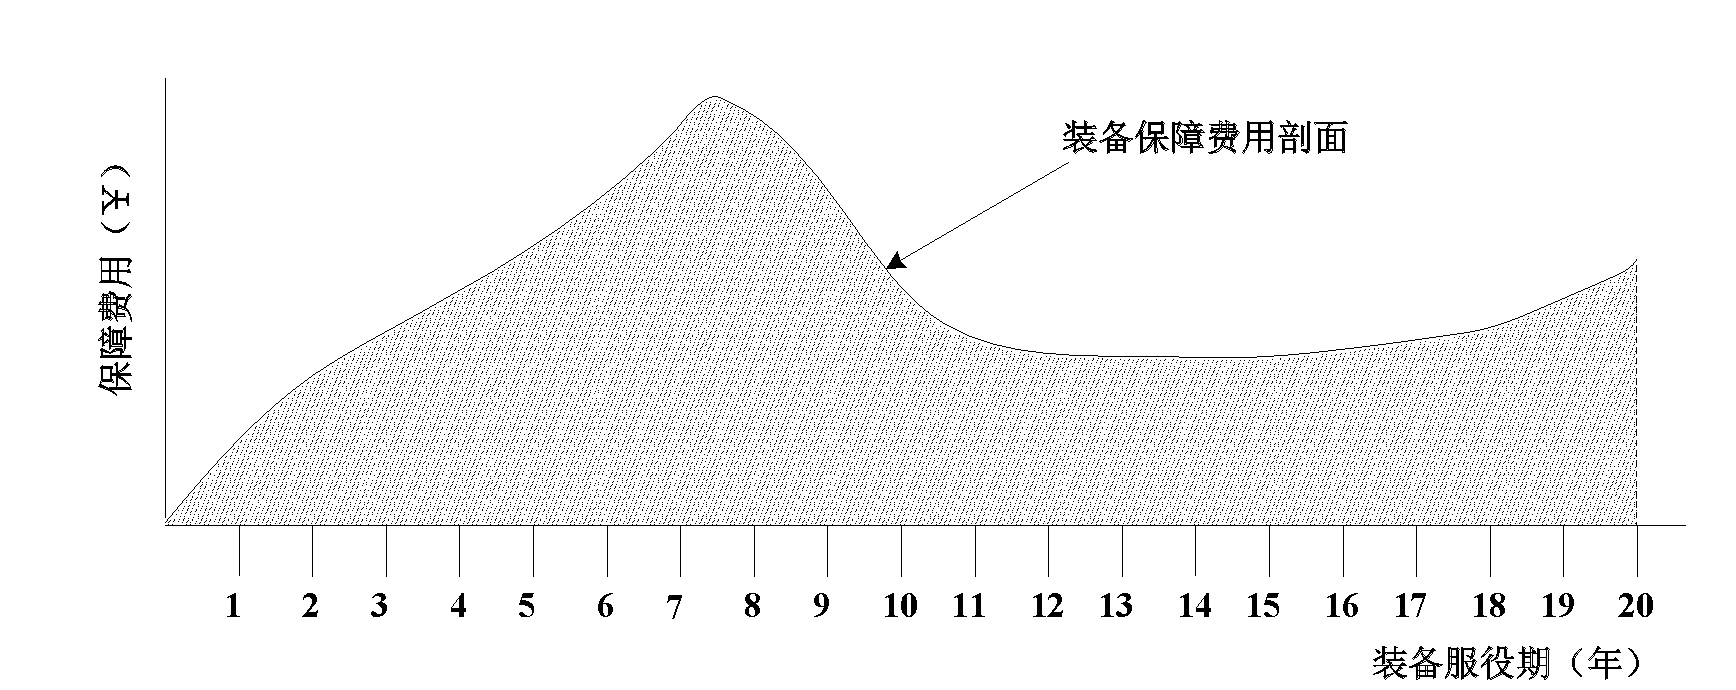 Method for forecasting equipment guarantee expense in development stage